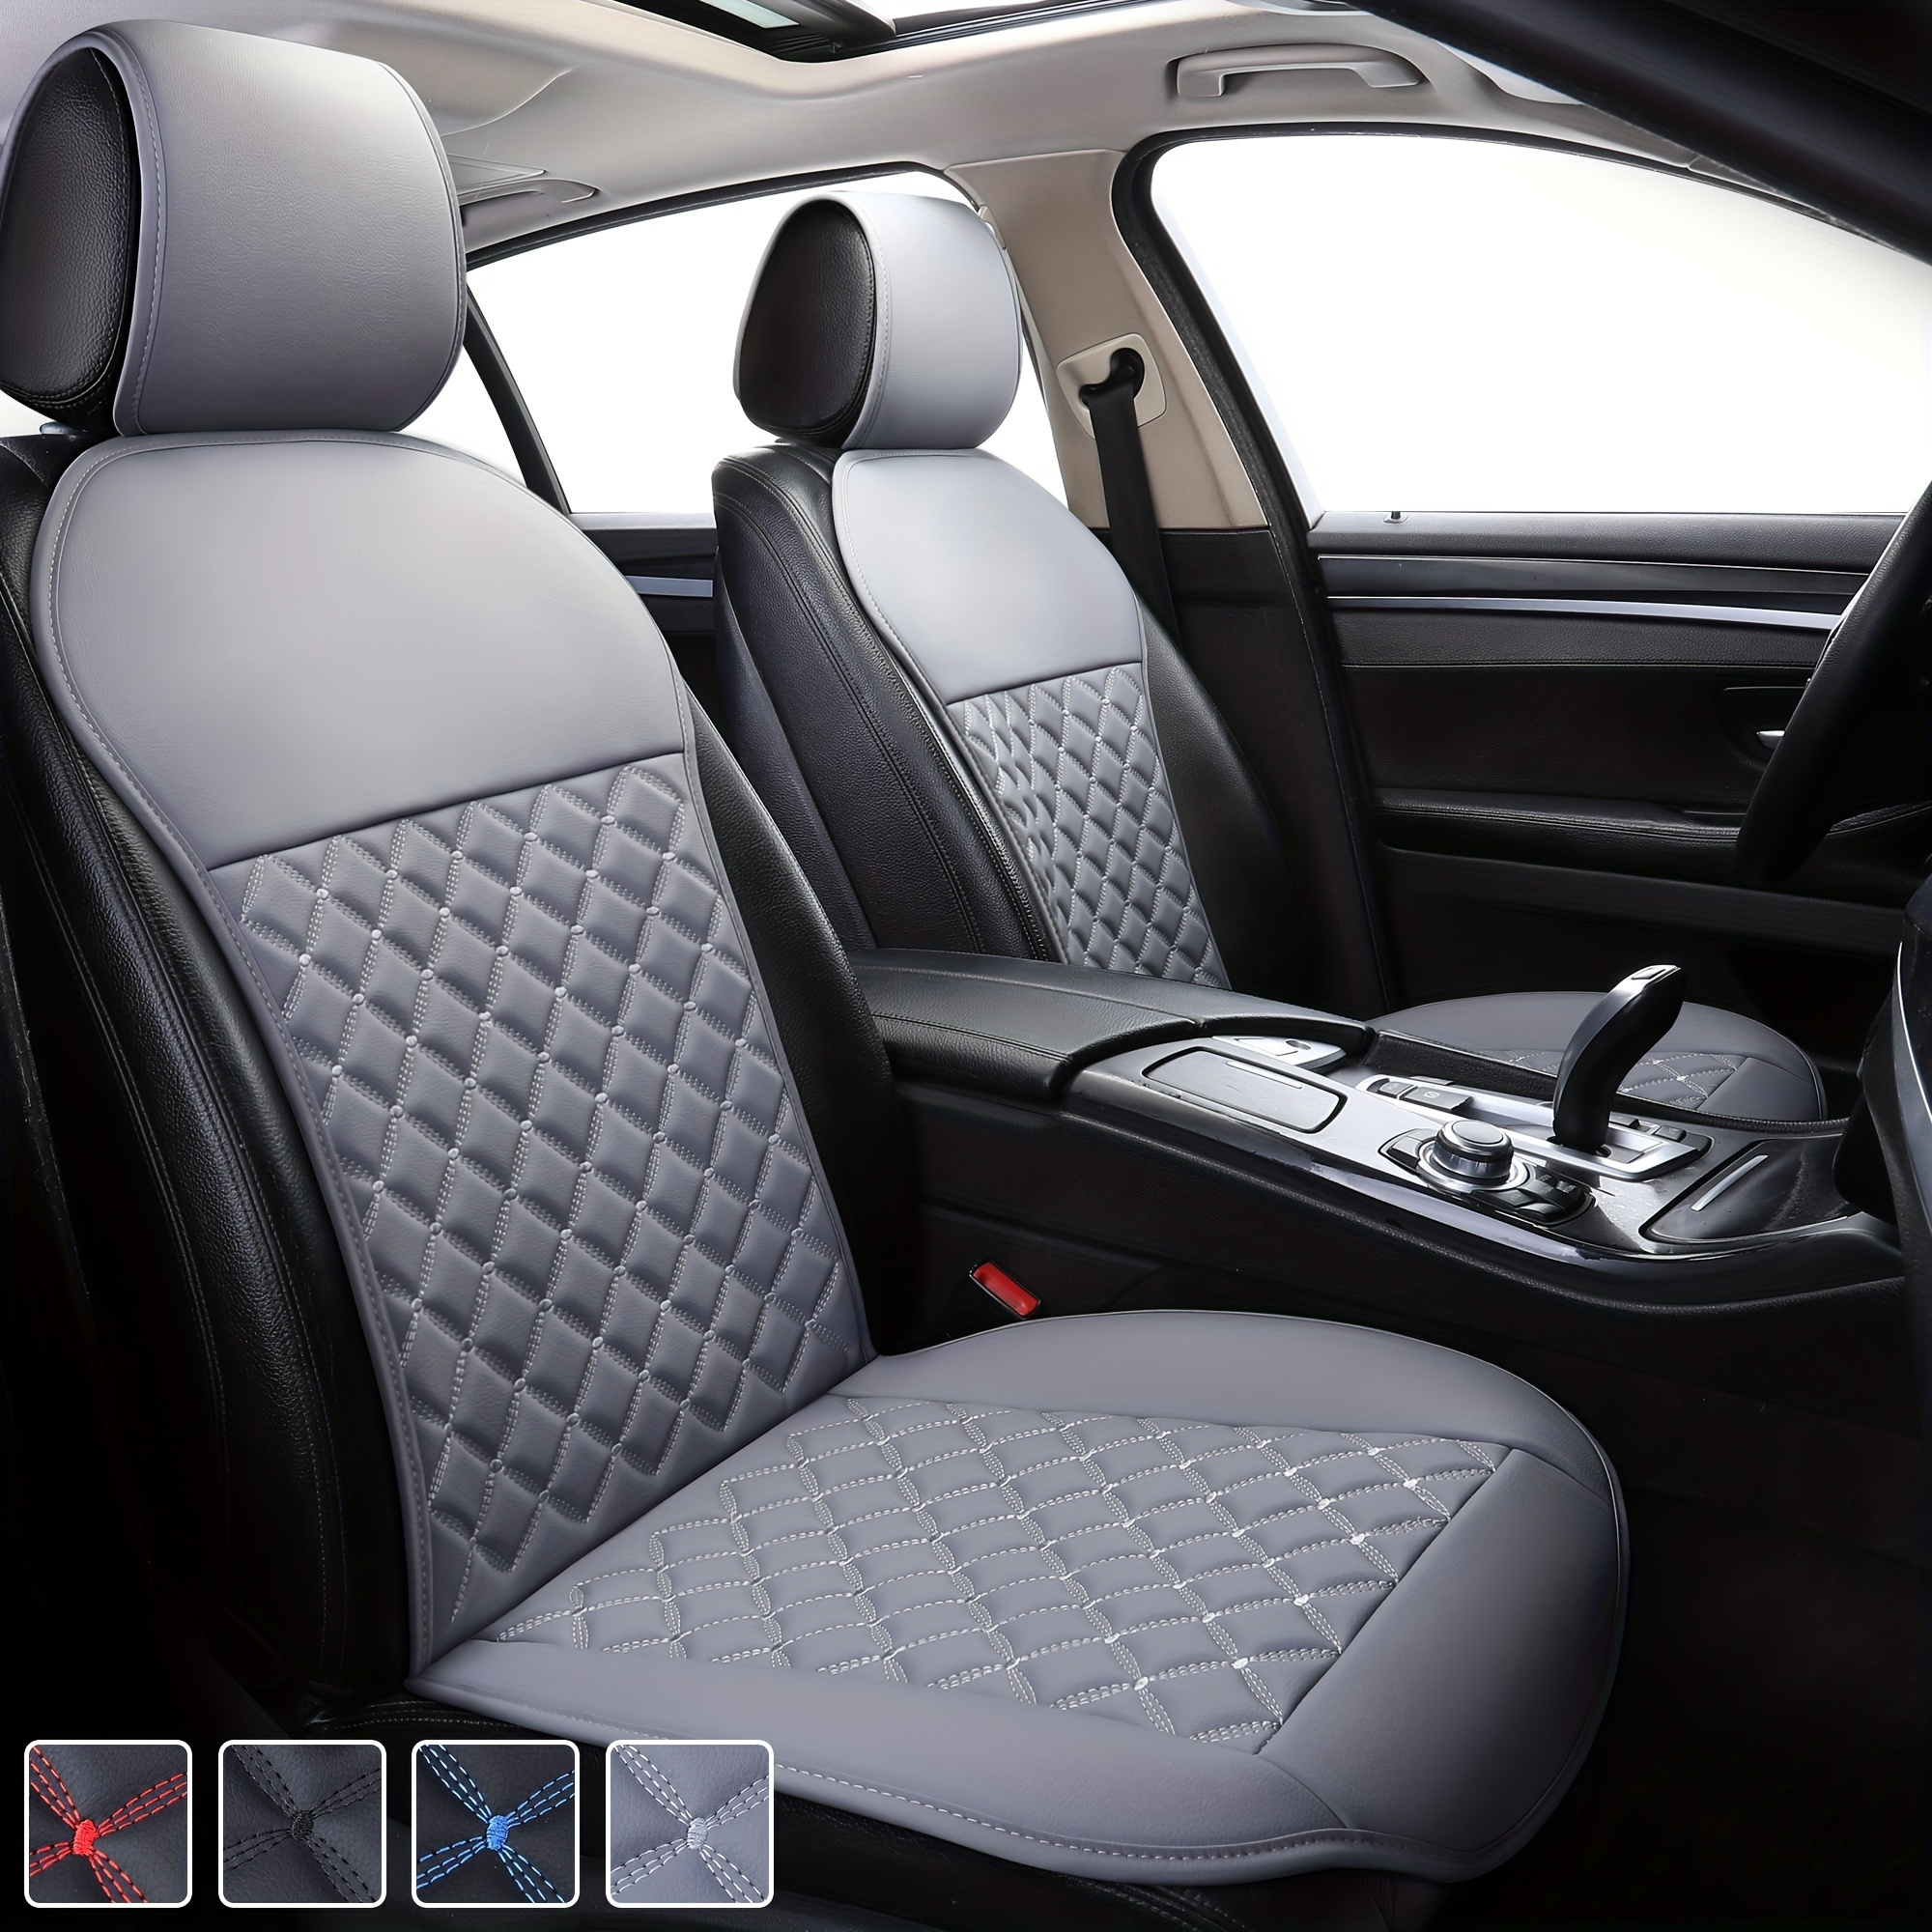 https://img.kwcdn.com/product/leather-auto-front-cushion/d69d2f15w98k18-65d80256/temu-avi/image-crop/923f3f7b-f290-4191-b99a-29669e0bb558.jpg